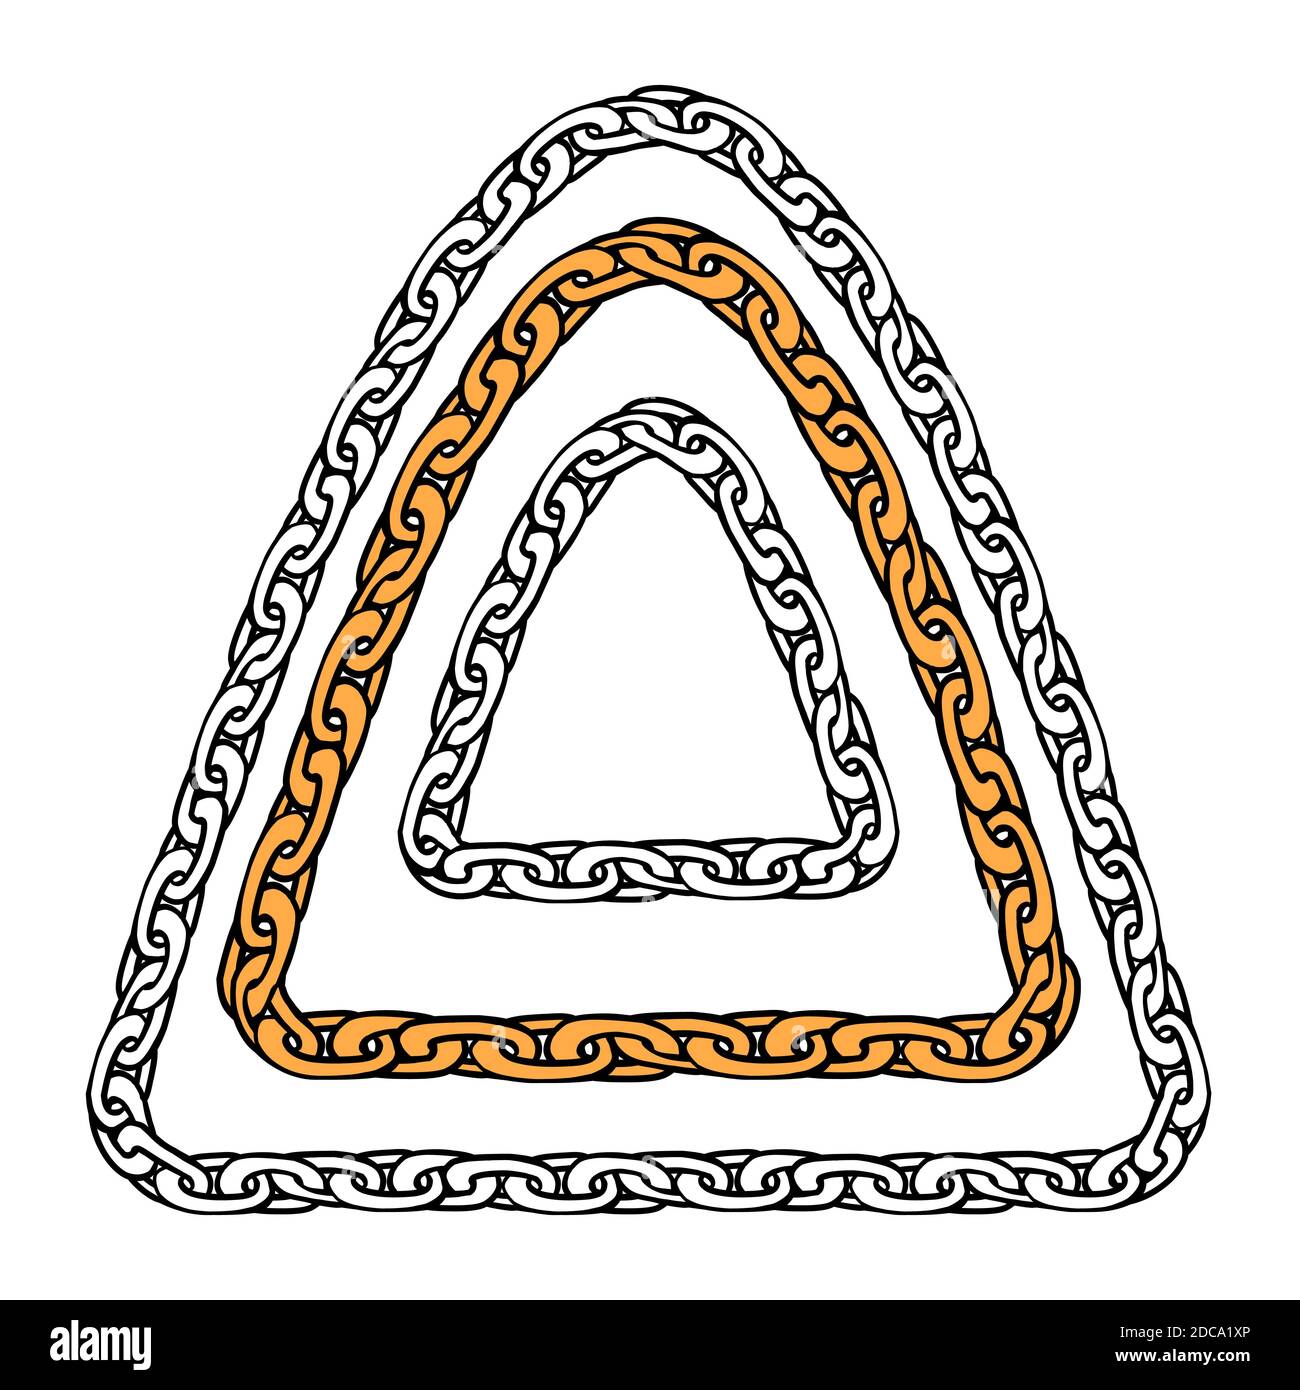 Set of contour chains of triangle shape. The object is separate